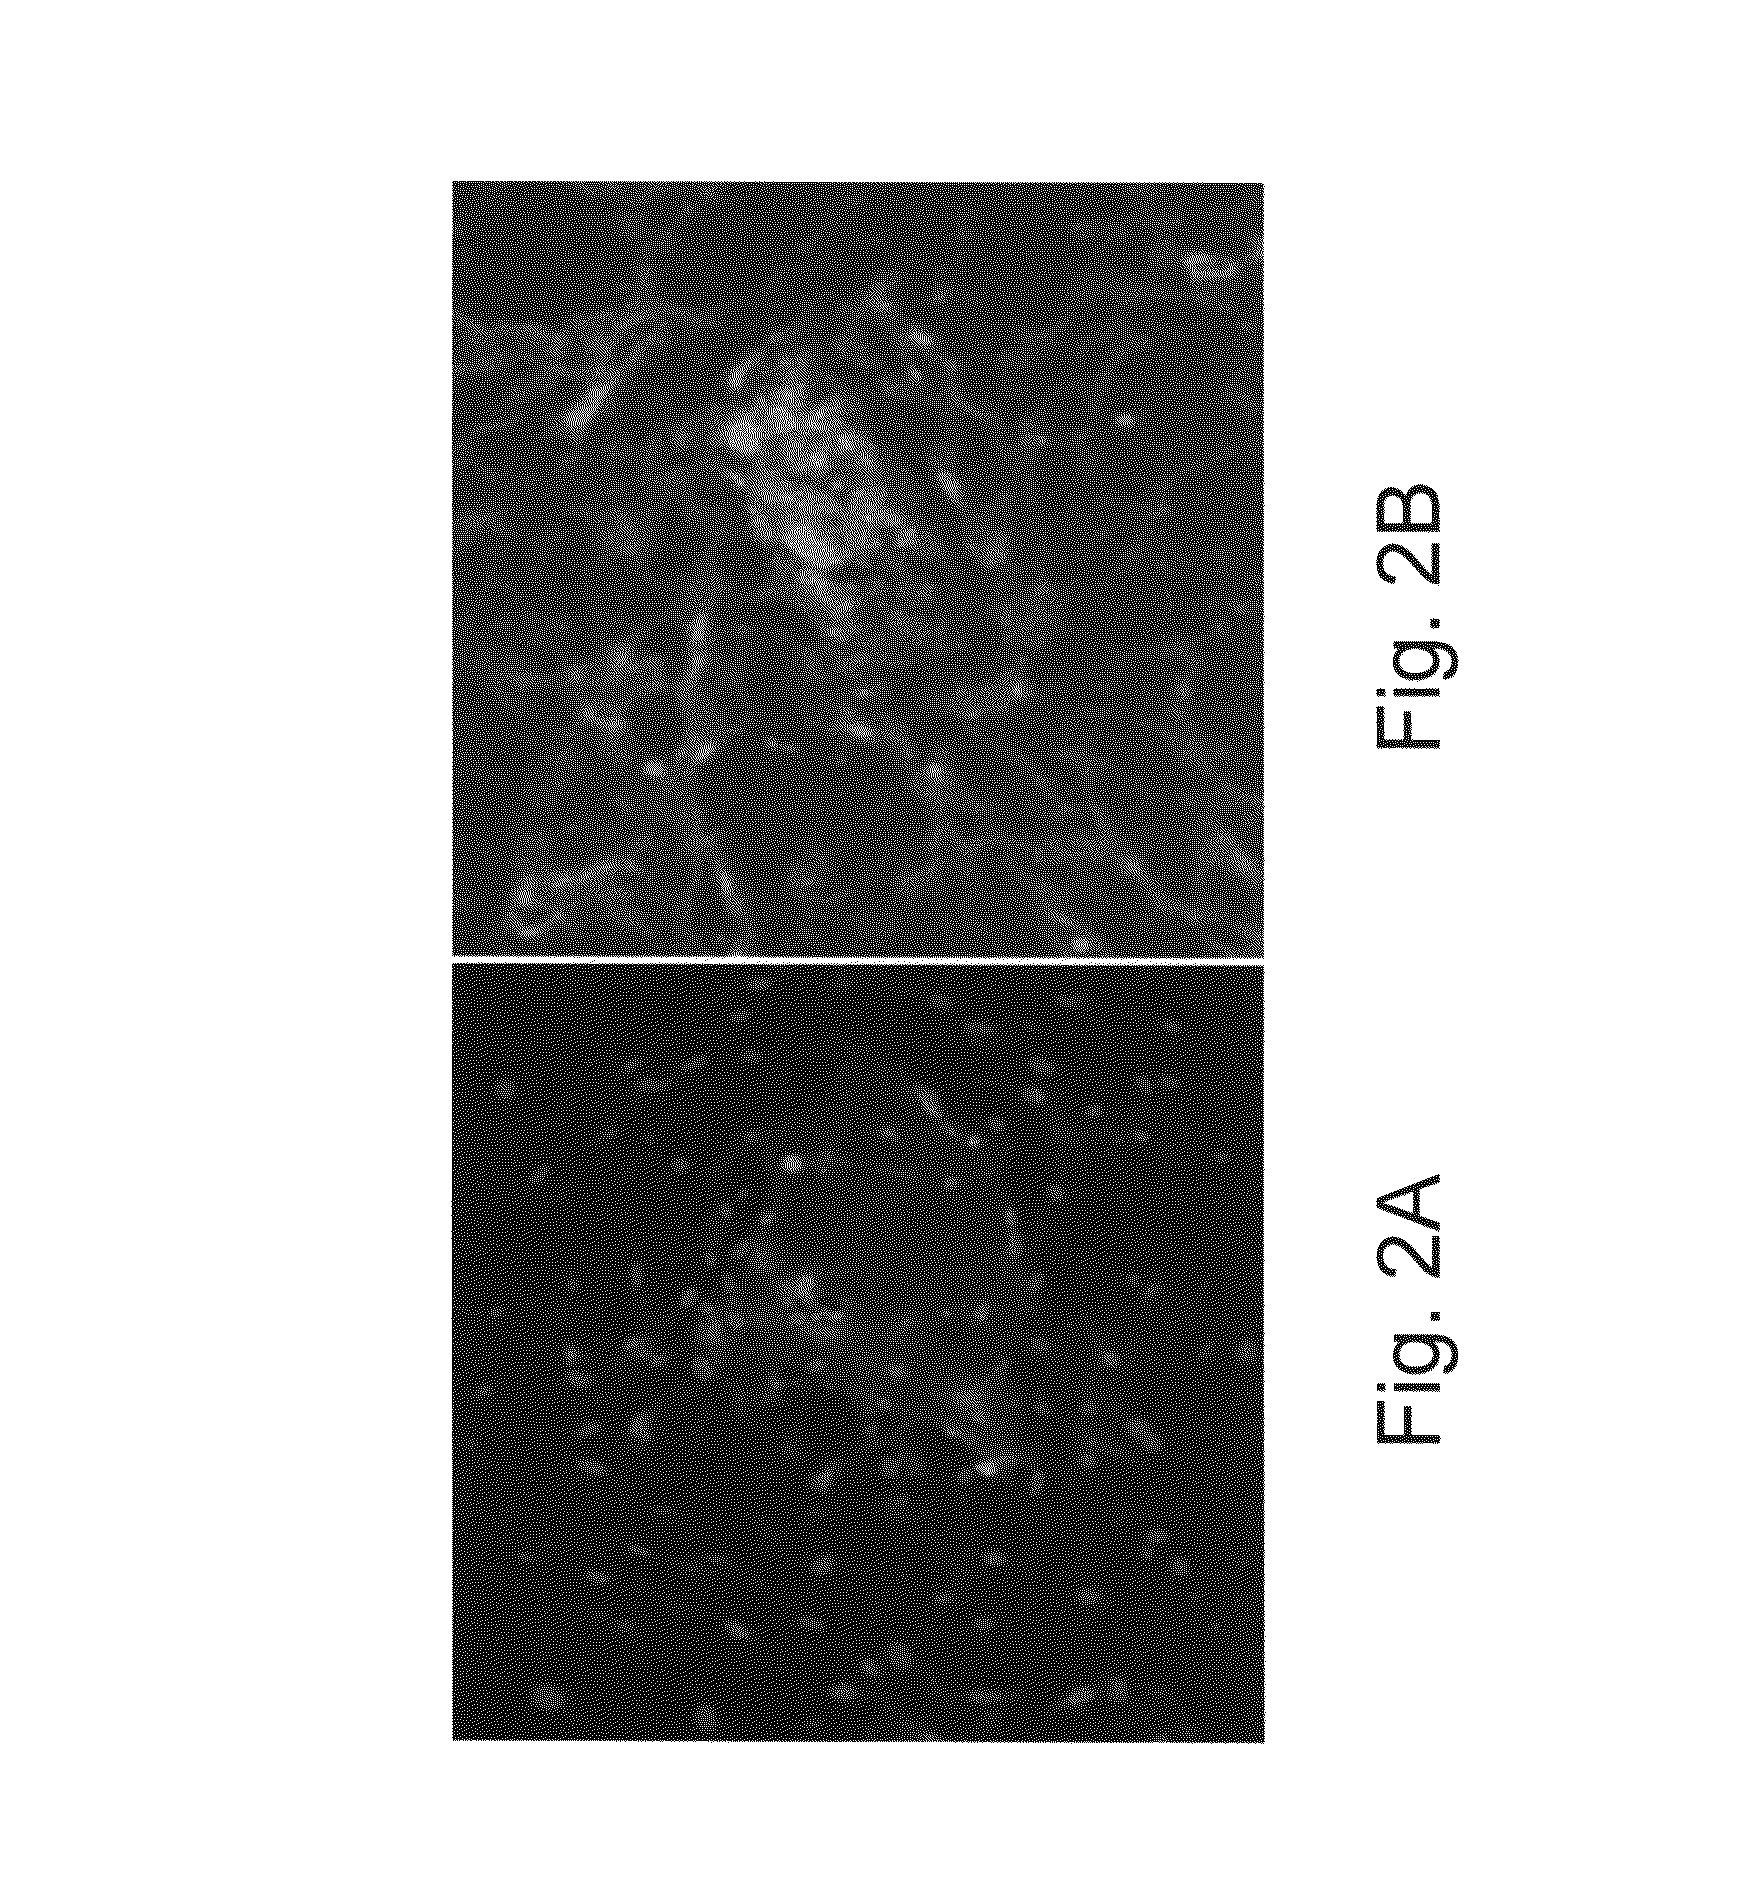 Vascularized islets and methods of producing same